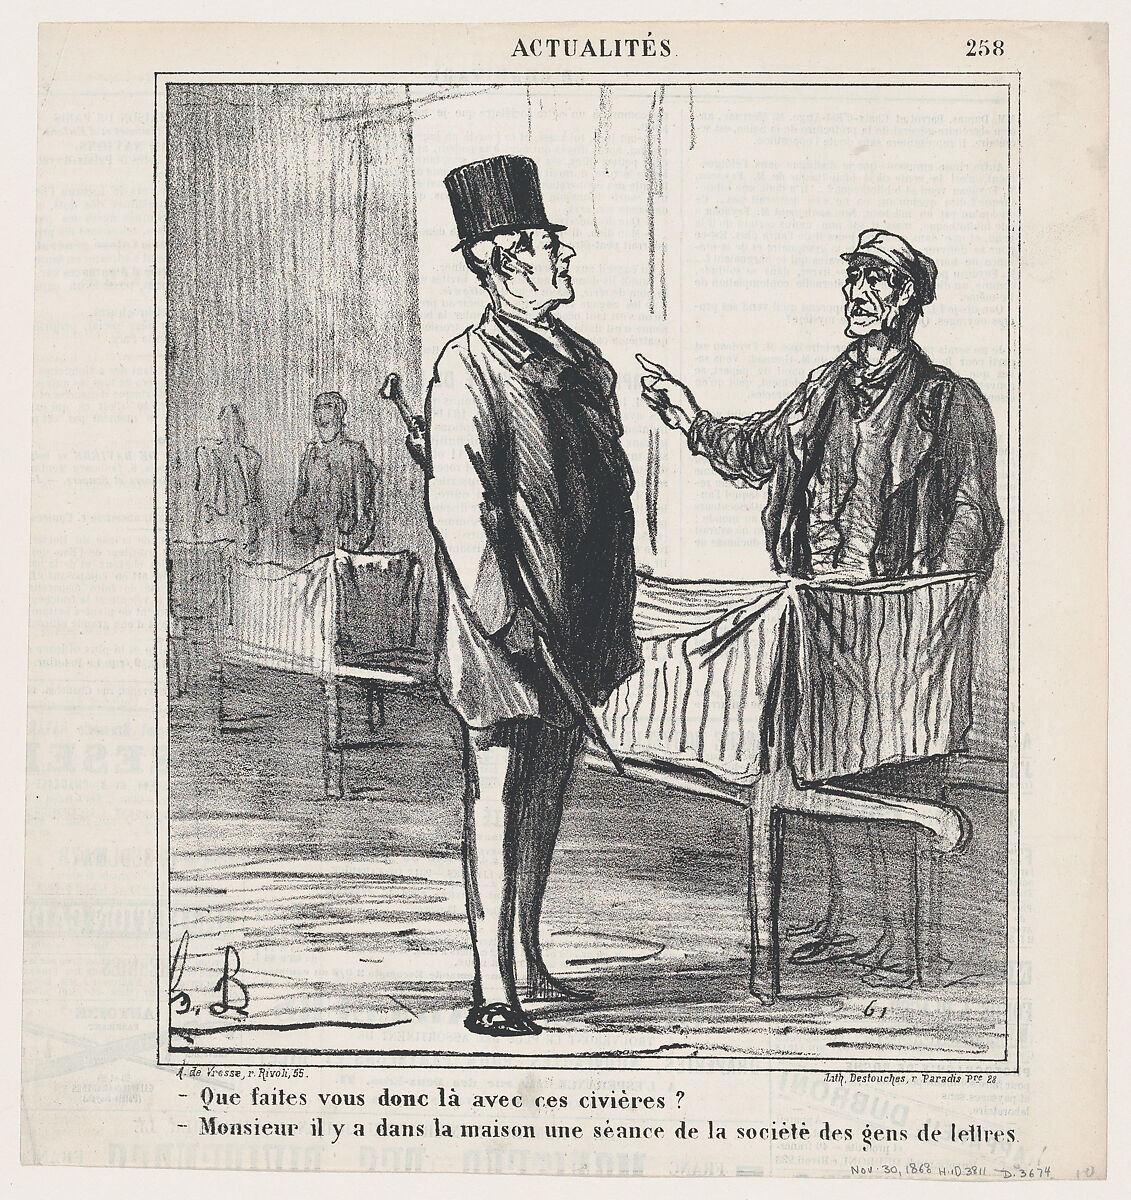 –What are you doing with these stretchers? –Monsieur, a reunion of the literary society is taking place in this house, from 'News of the day,' published in Le Charivari, November 30, 1868, Honoré Daumier (French, Marseilles 1808–1879 Valmondois), Lithograph on newsprint; second state of two (Delteil) 